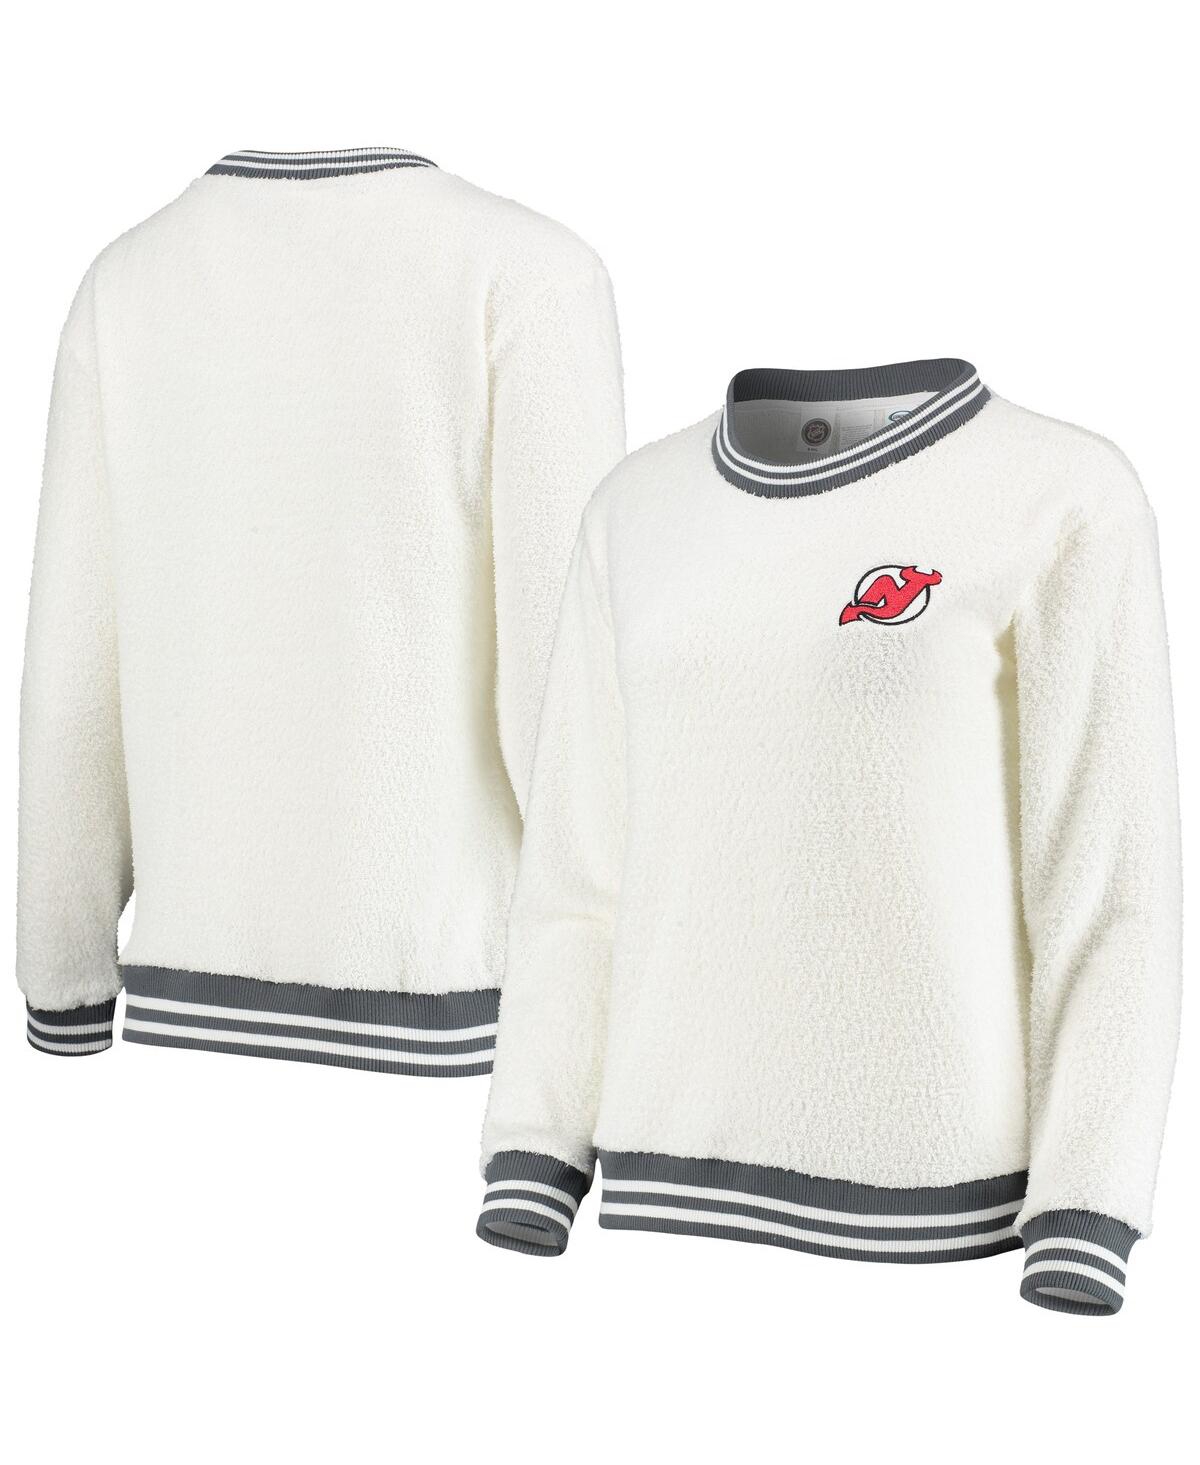 Women's Concepts Sport Cream and Charcoal New Jersey Devils Granite Sherpa Pullover Sweatshirt - Cream, Charcoal